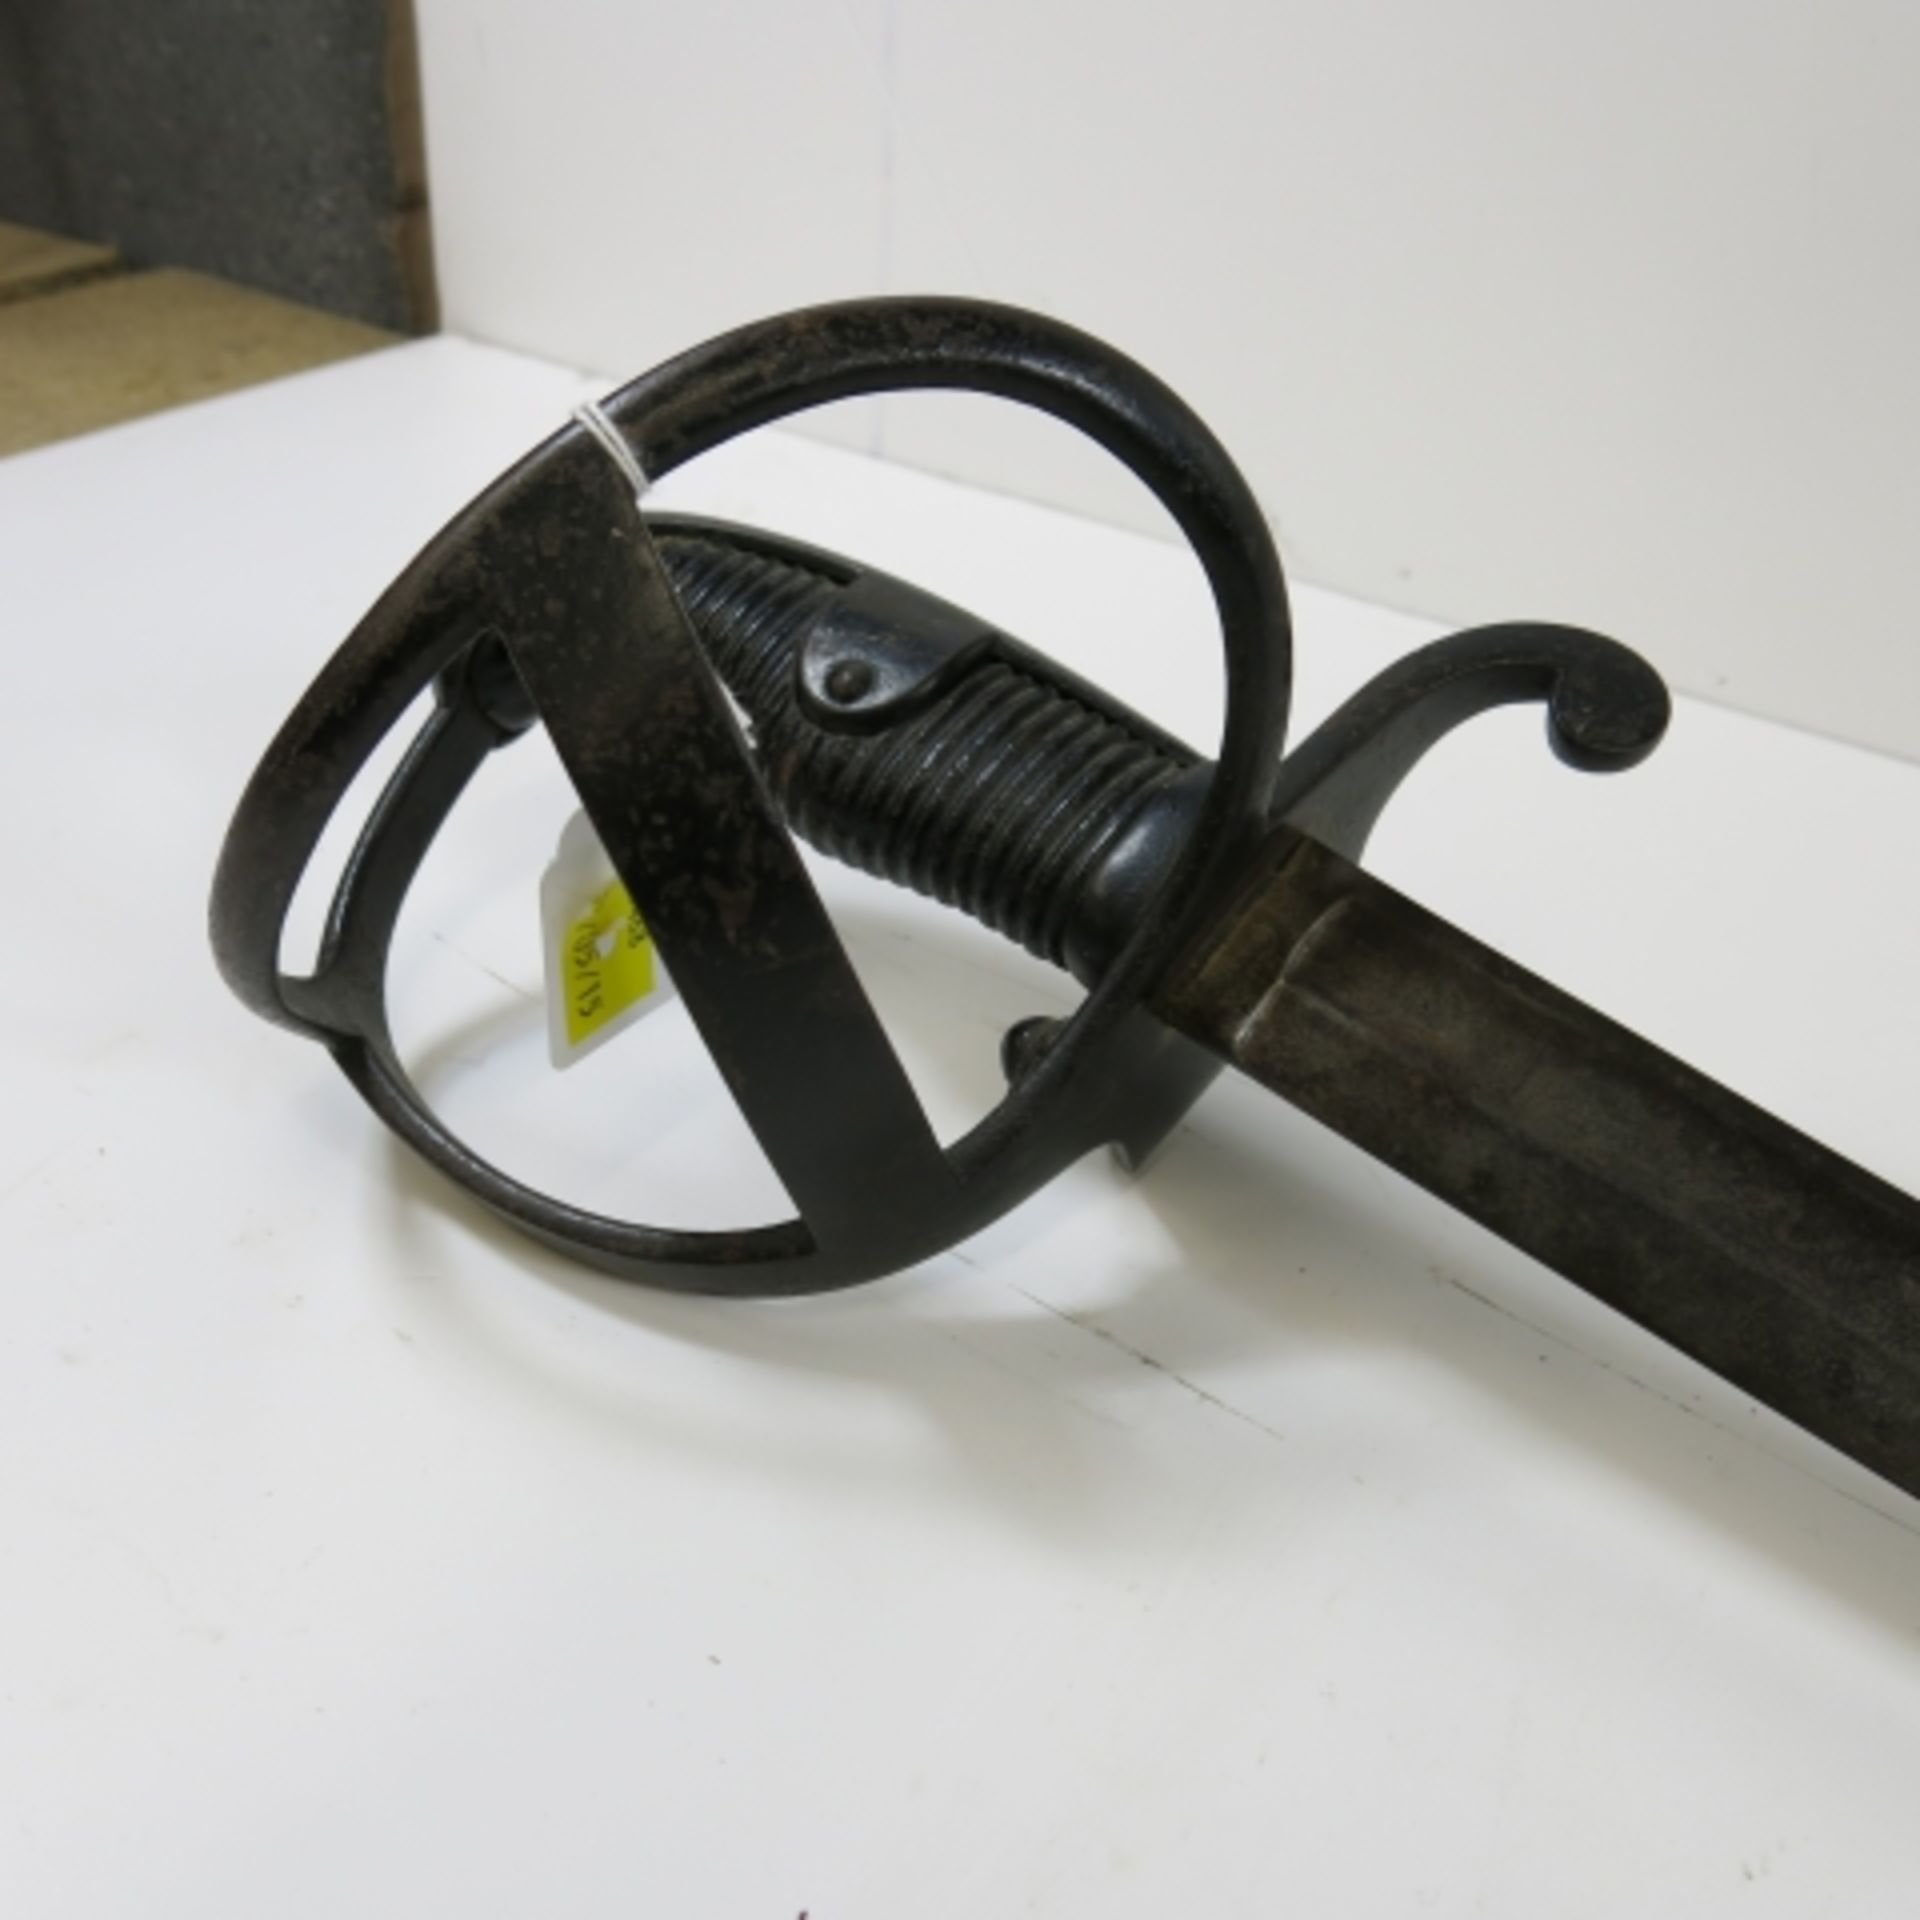 Early 20th century German Cavalry Sword, open basket with wooden grip. 90cm curved blade with - Image 3 of 3